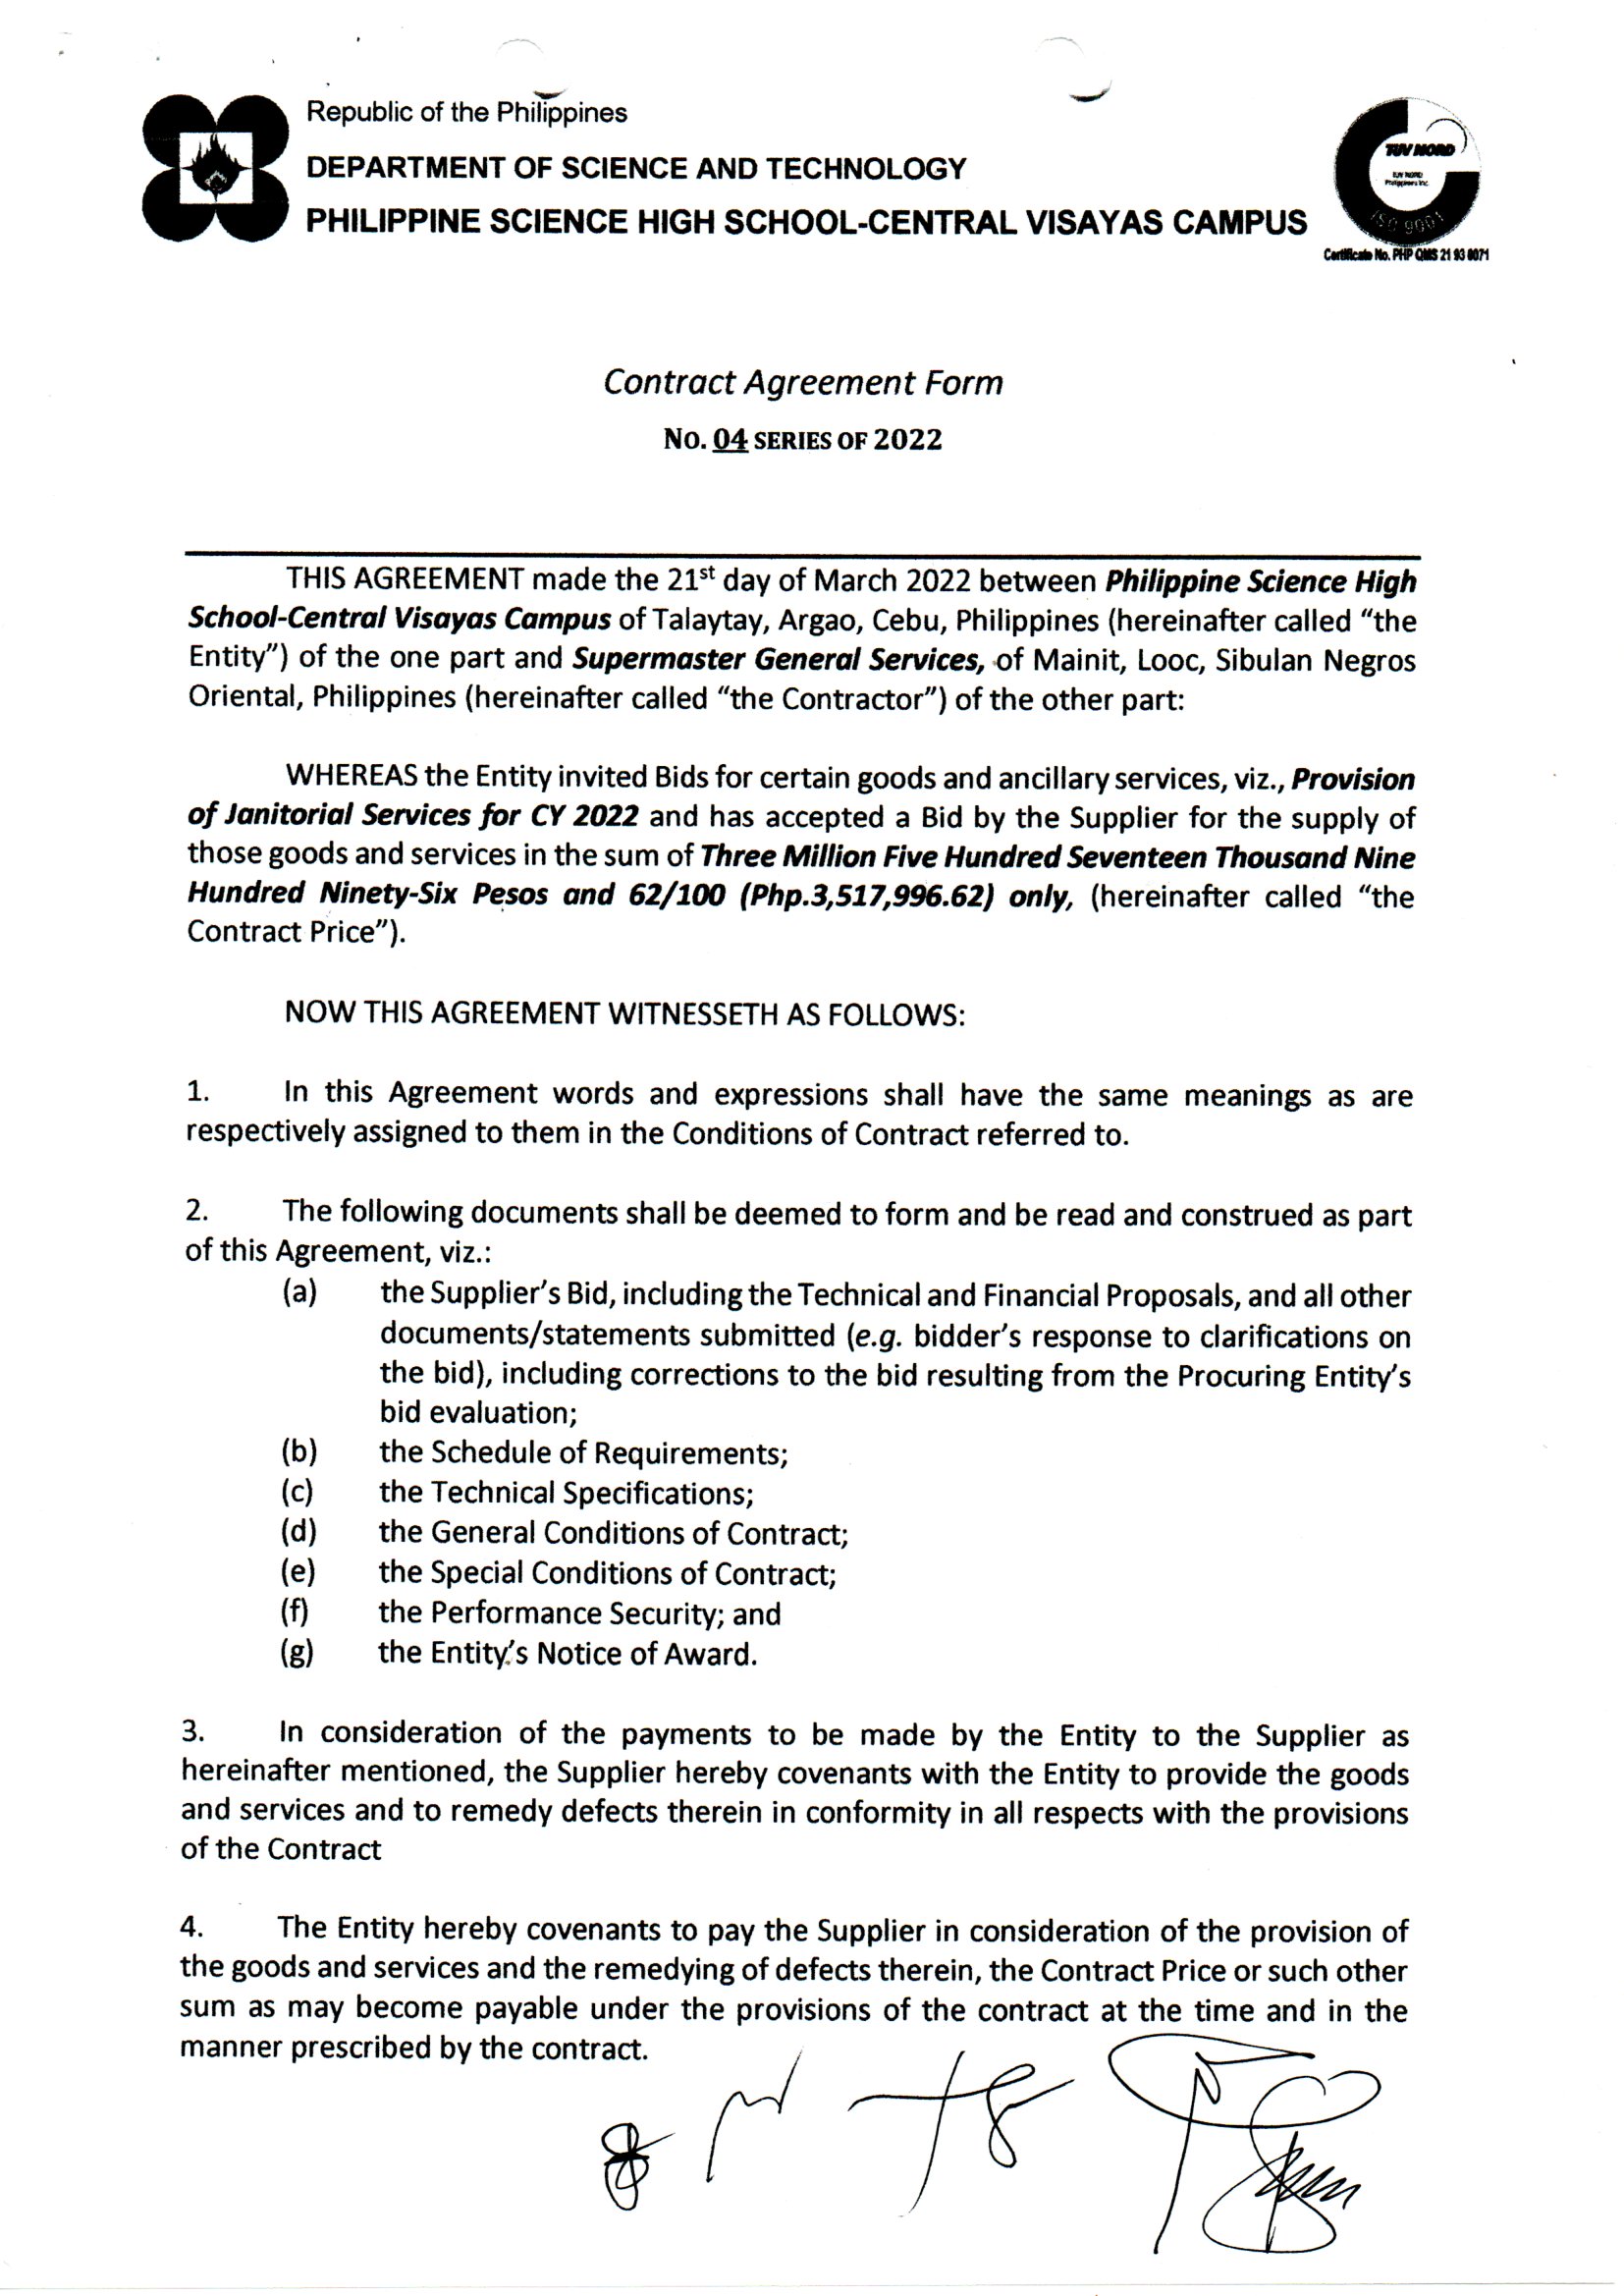 contract provision janitorial services 2022 p1of3